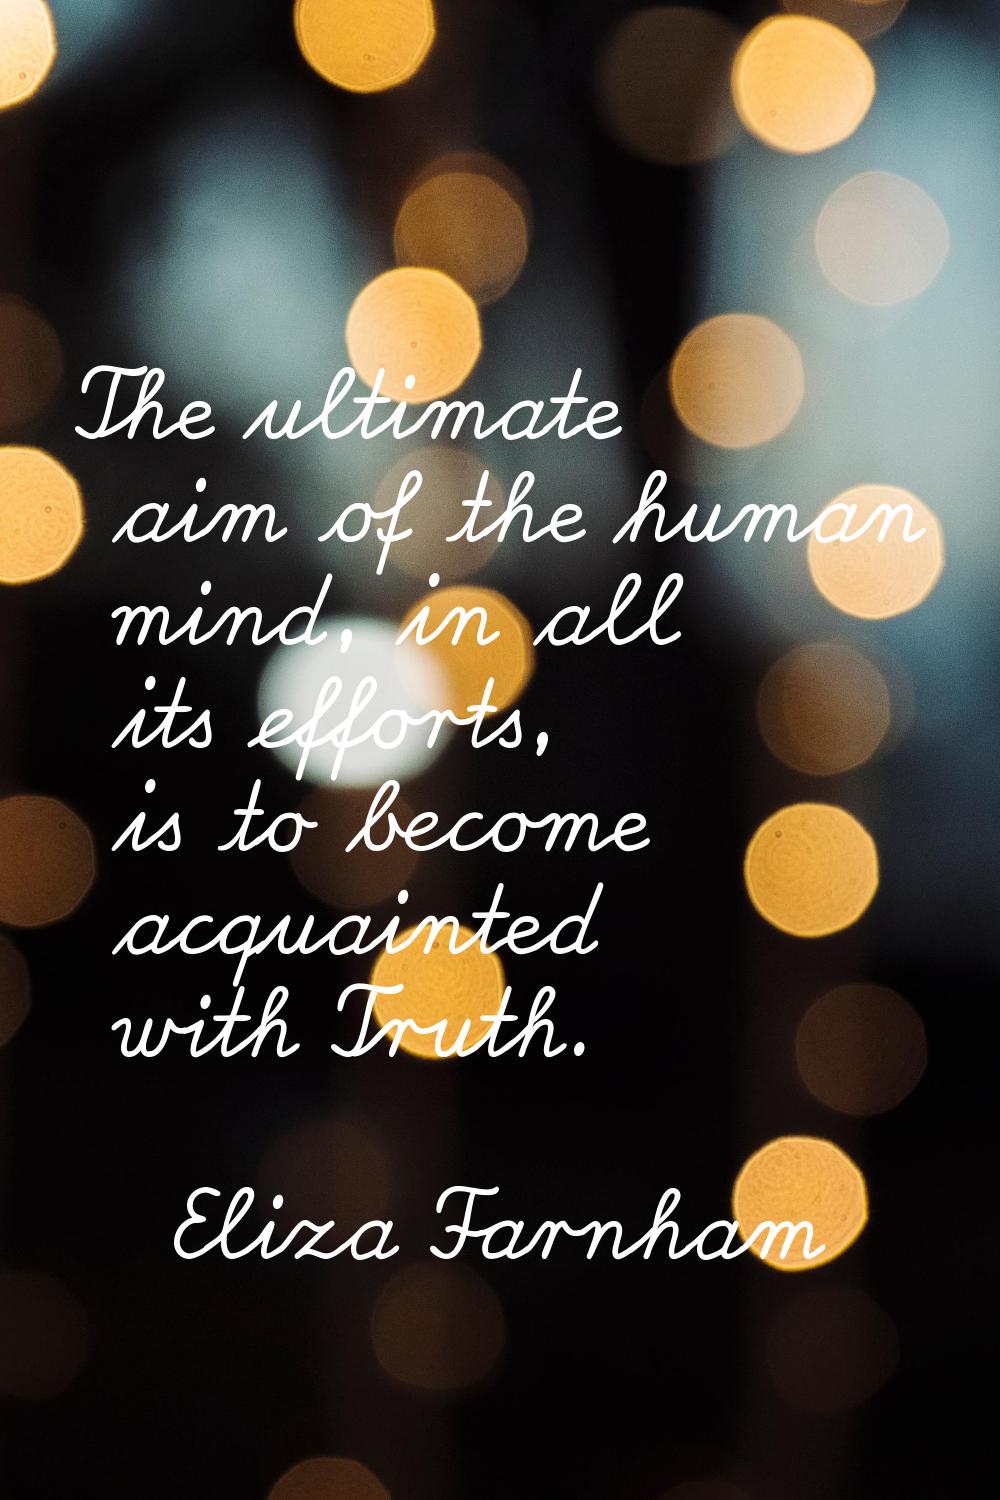 The ultimate aim of the human mind, in all its efforts, is to become acquainted with Truth.